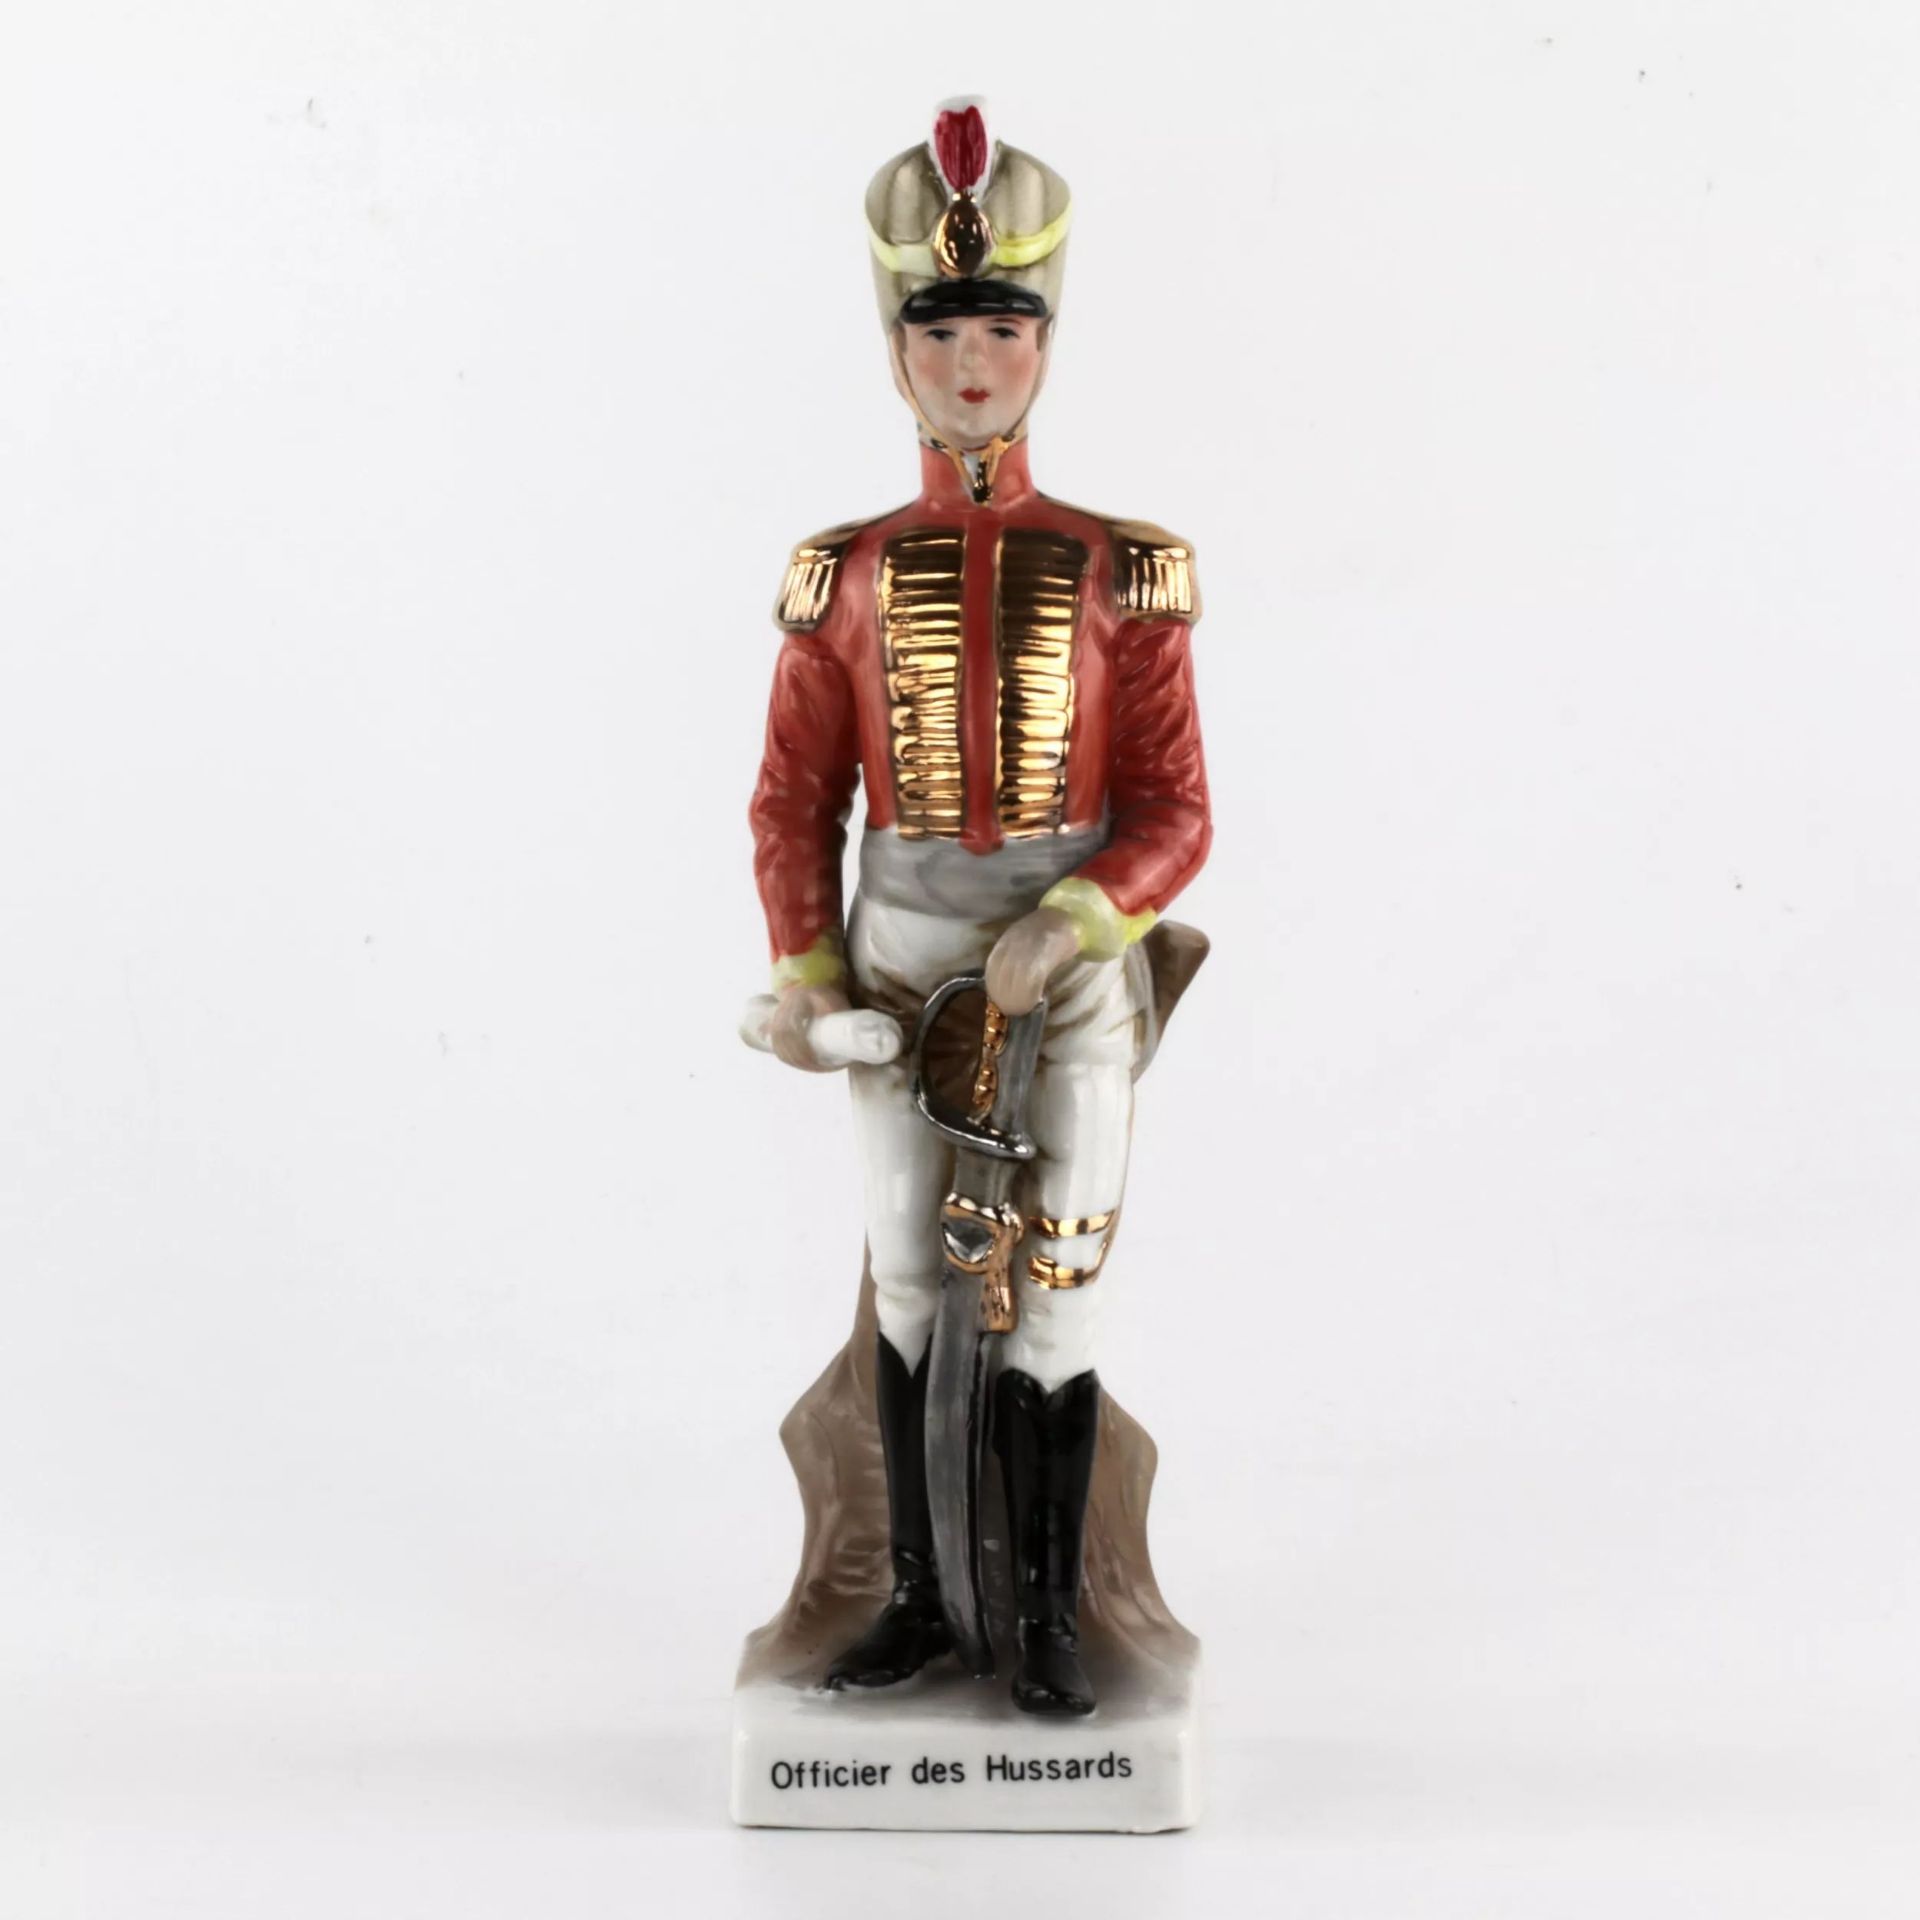 Porcelain figurine "Hussar with a report".